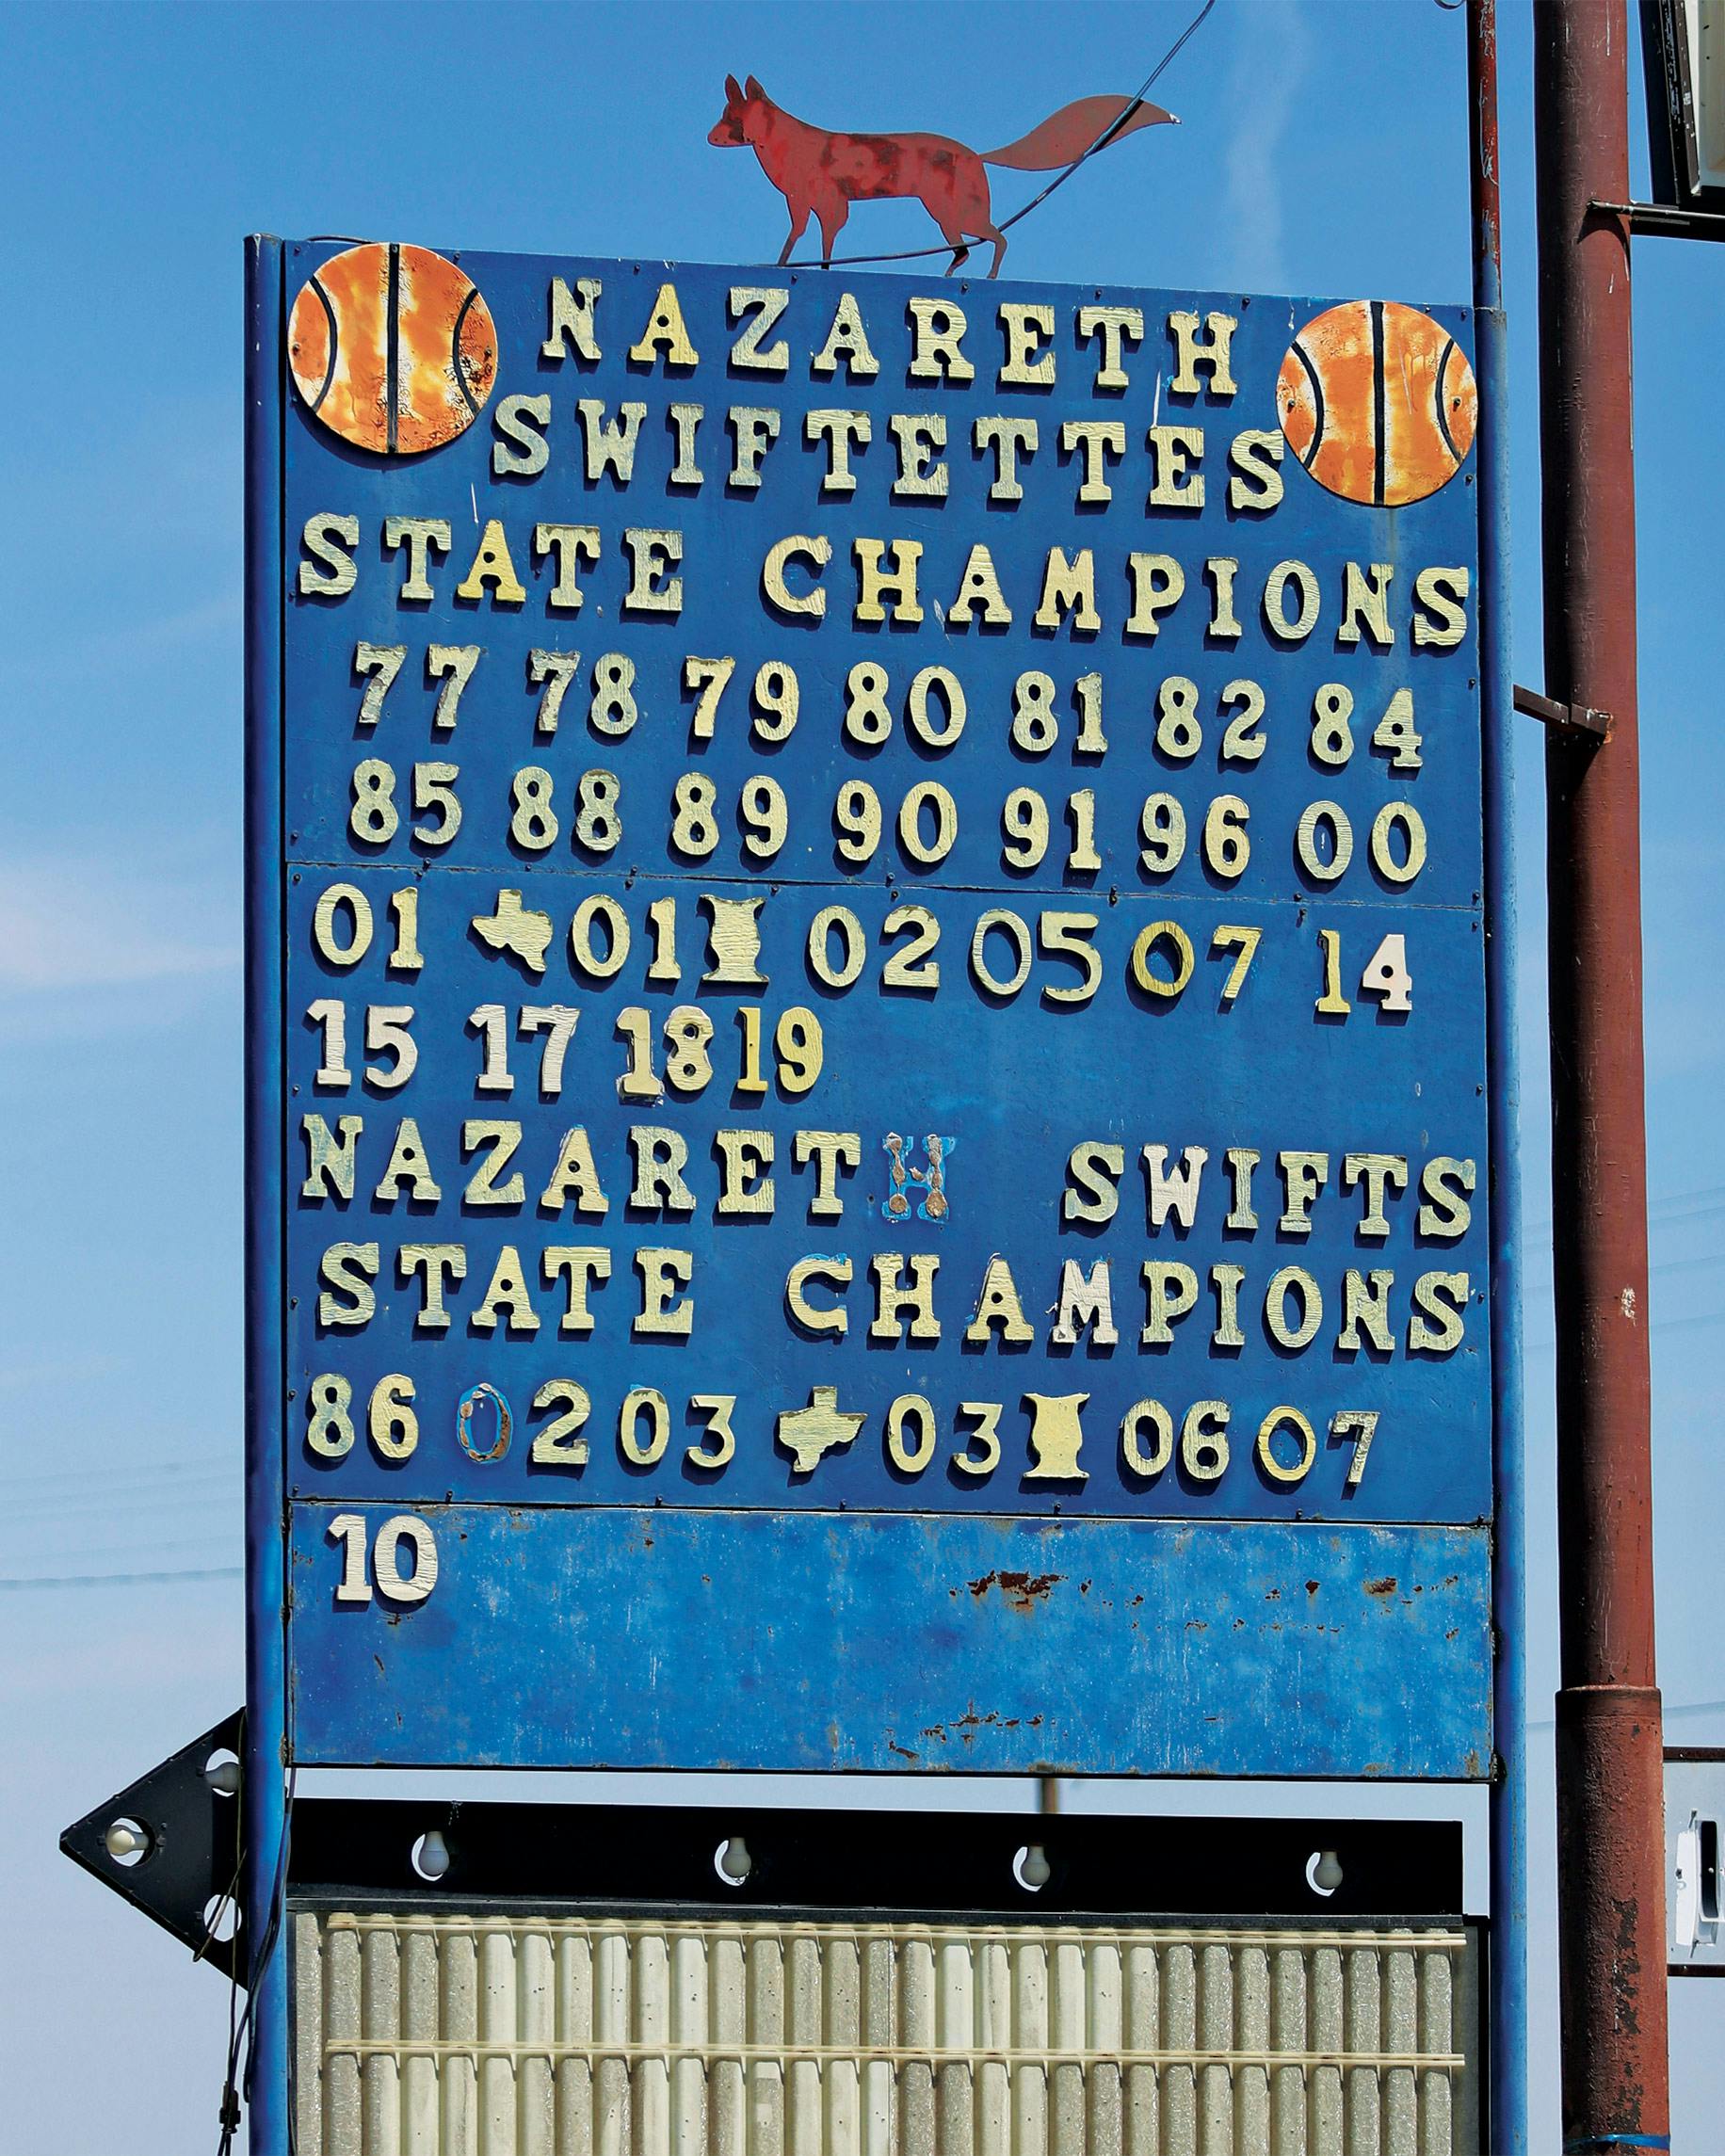 A sign in downtown Nazareth, touting the Swiftettes' and Swifts' state championships.